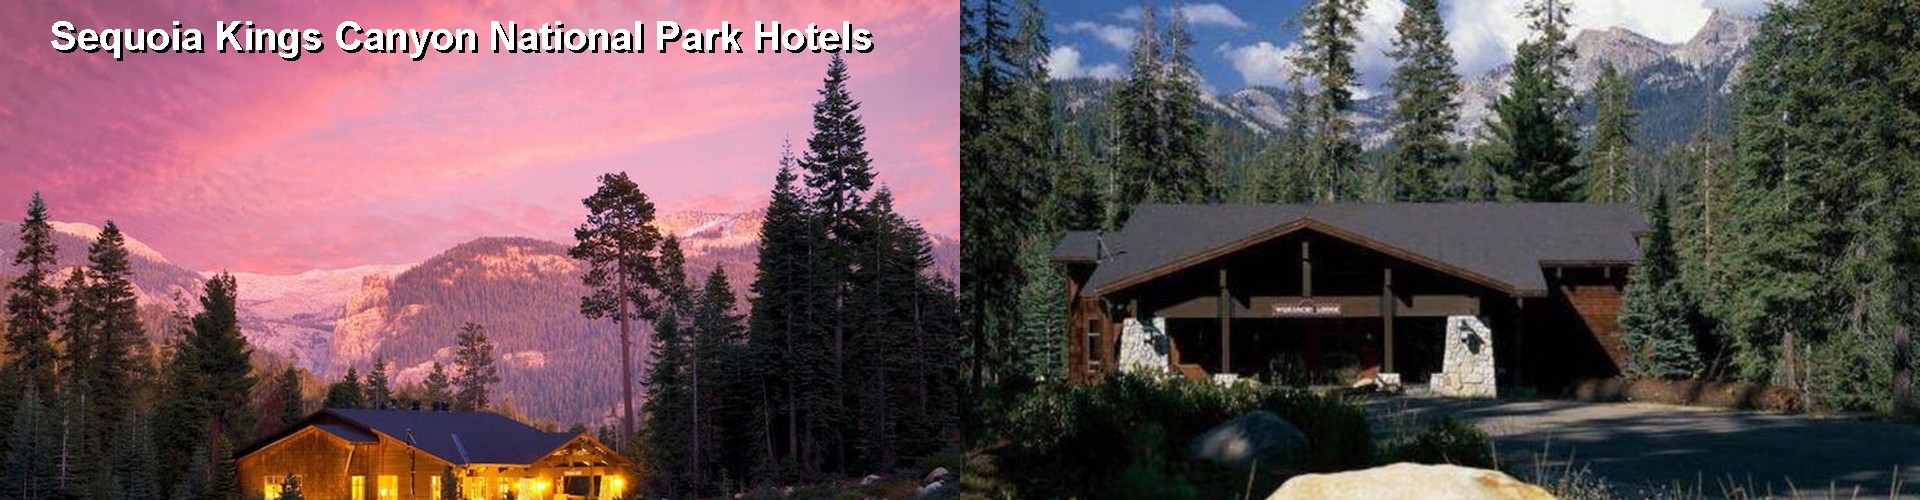 2 Best Hotels near Sequoia Kings Canyon National Park